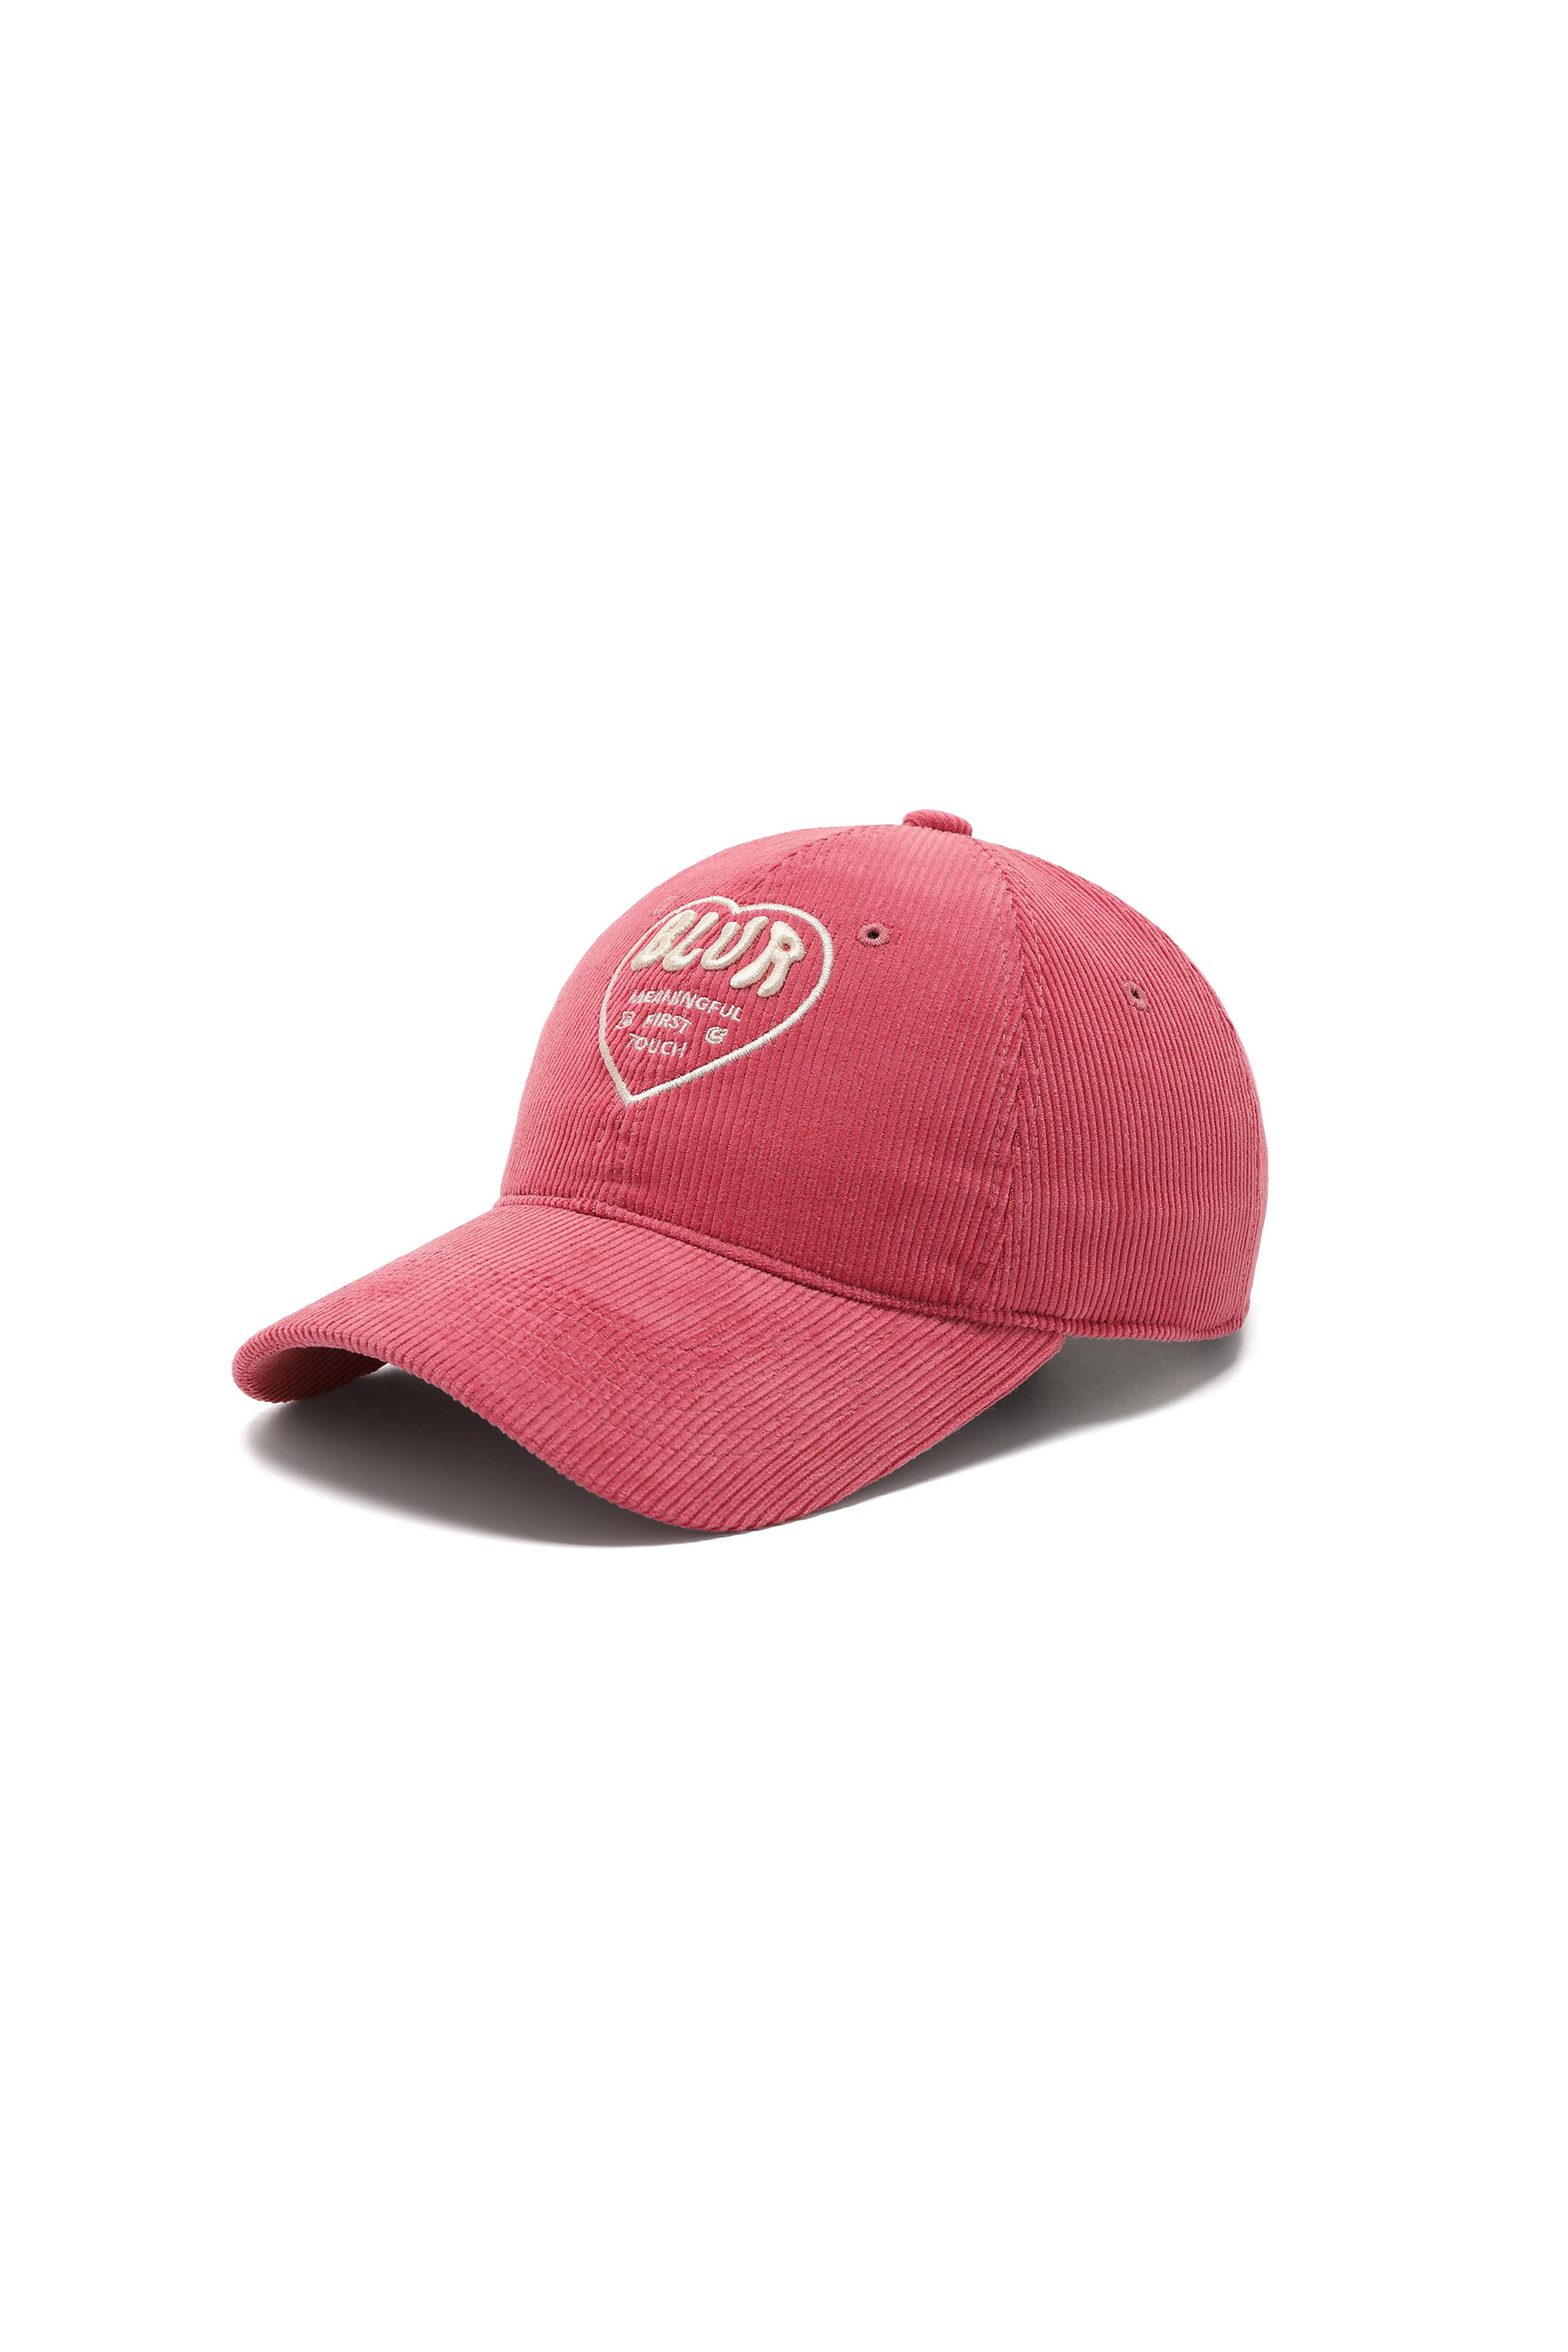 HEART EMBROIDERED CORDUROY CAP - PINK